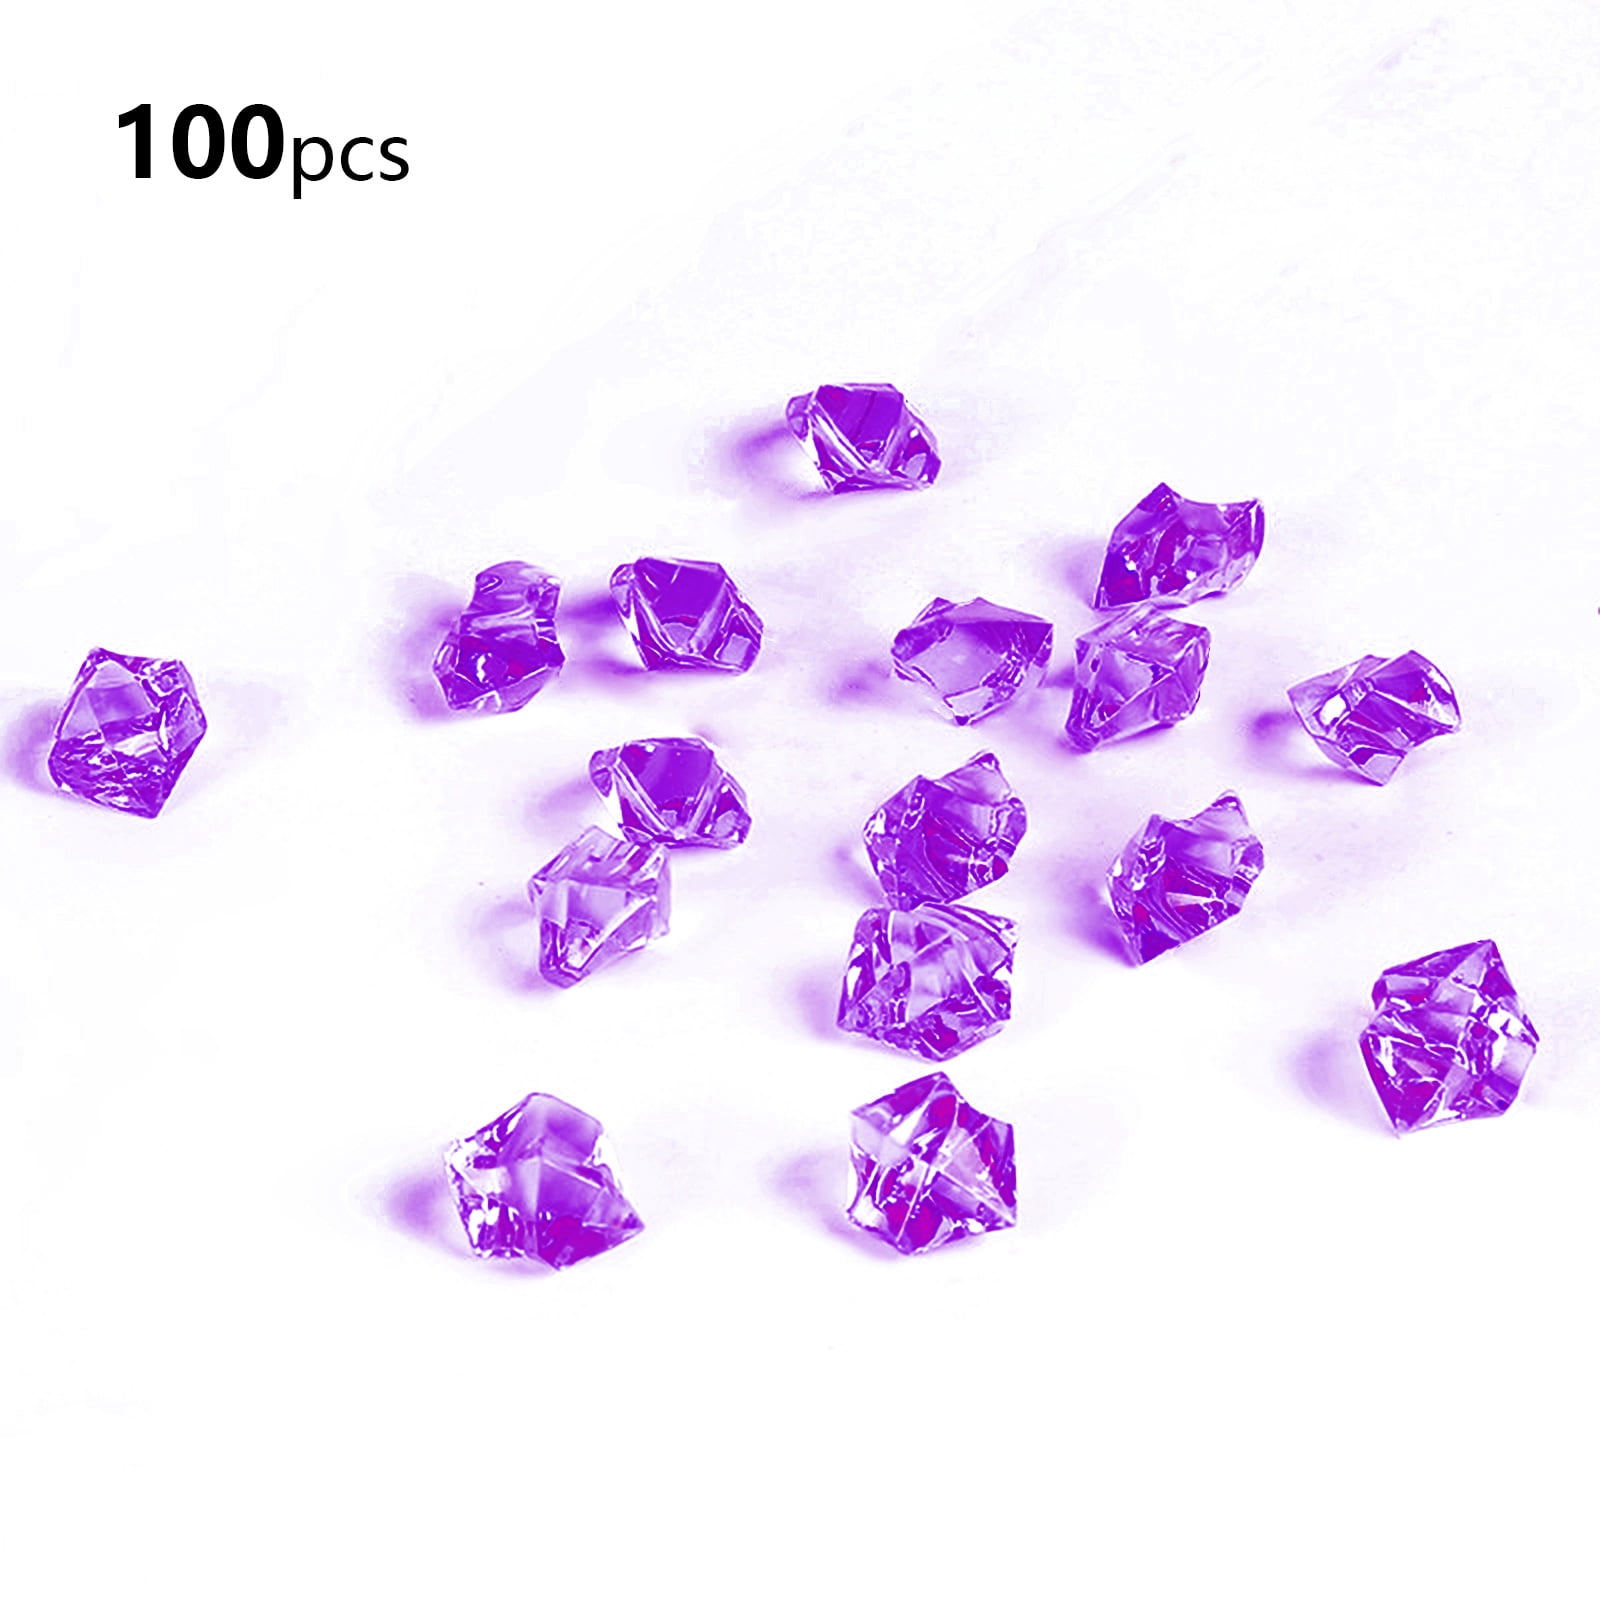 5000Pcs Crystal Gem Stone Ice Rocks Table Scatters Vase Decorations 6 Colors 